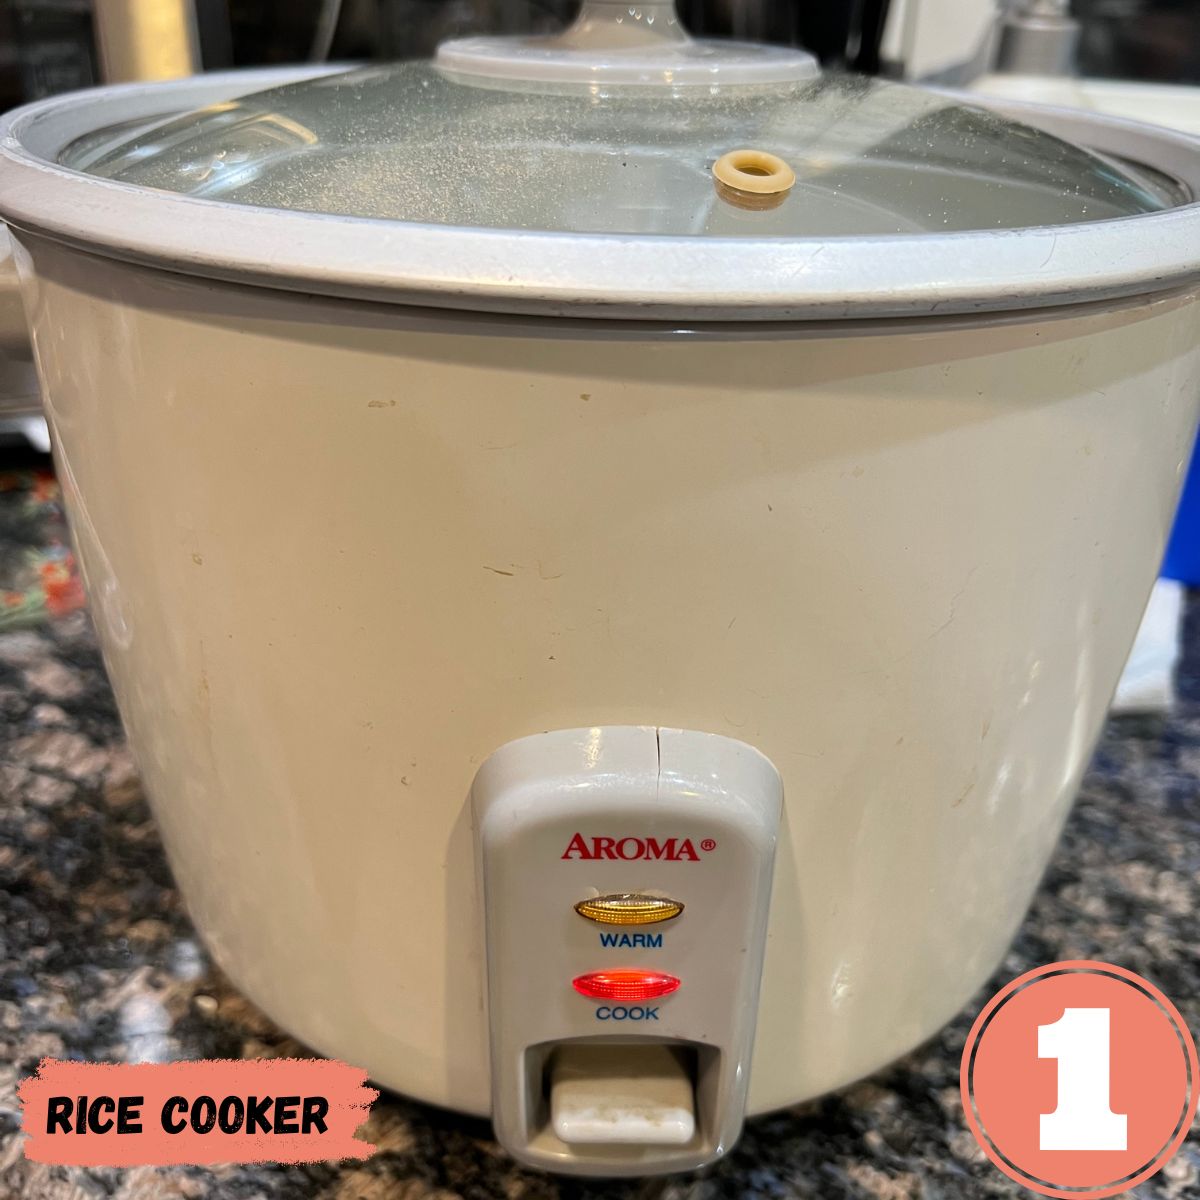 A rice cooker on the kitchen counter